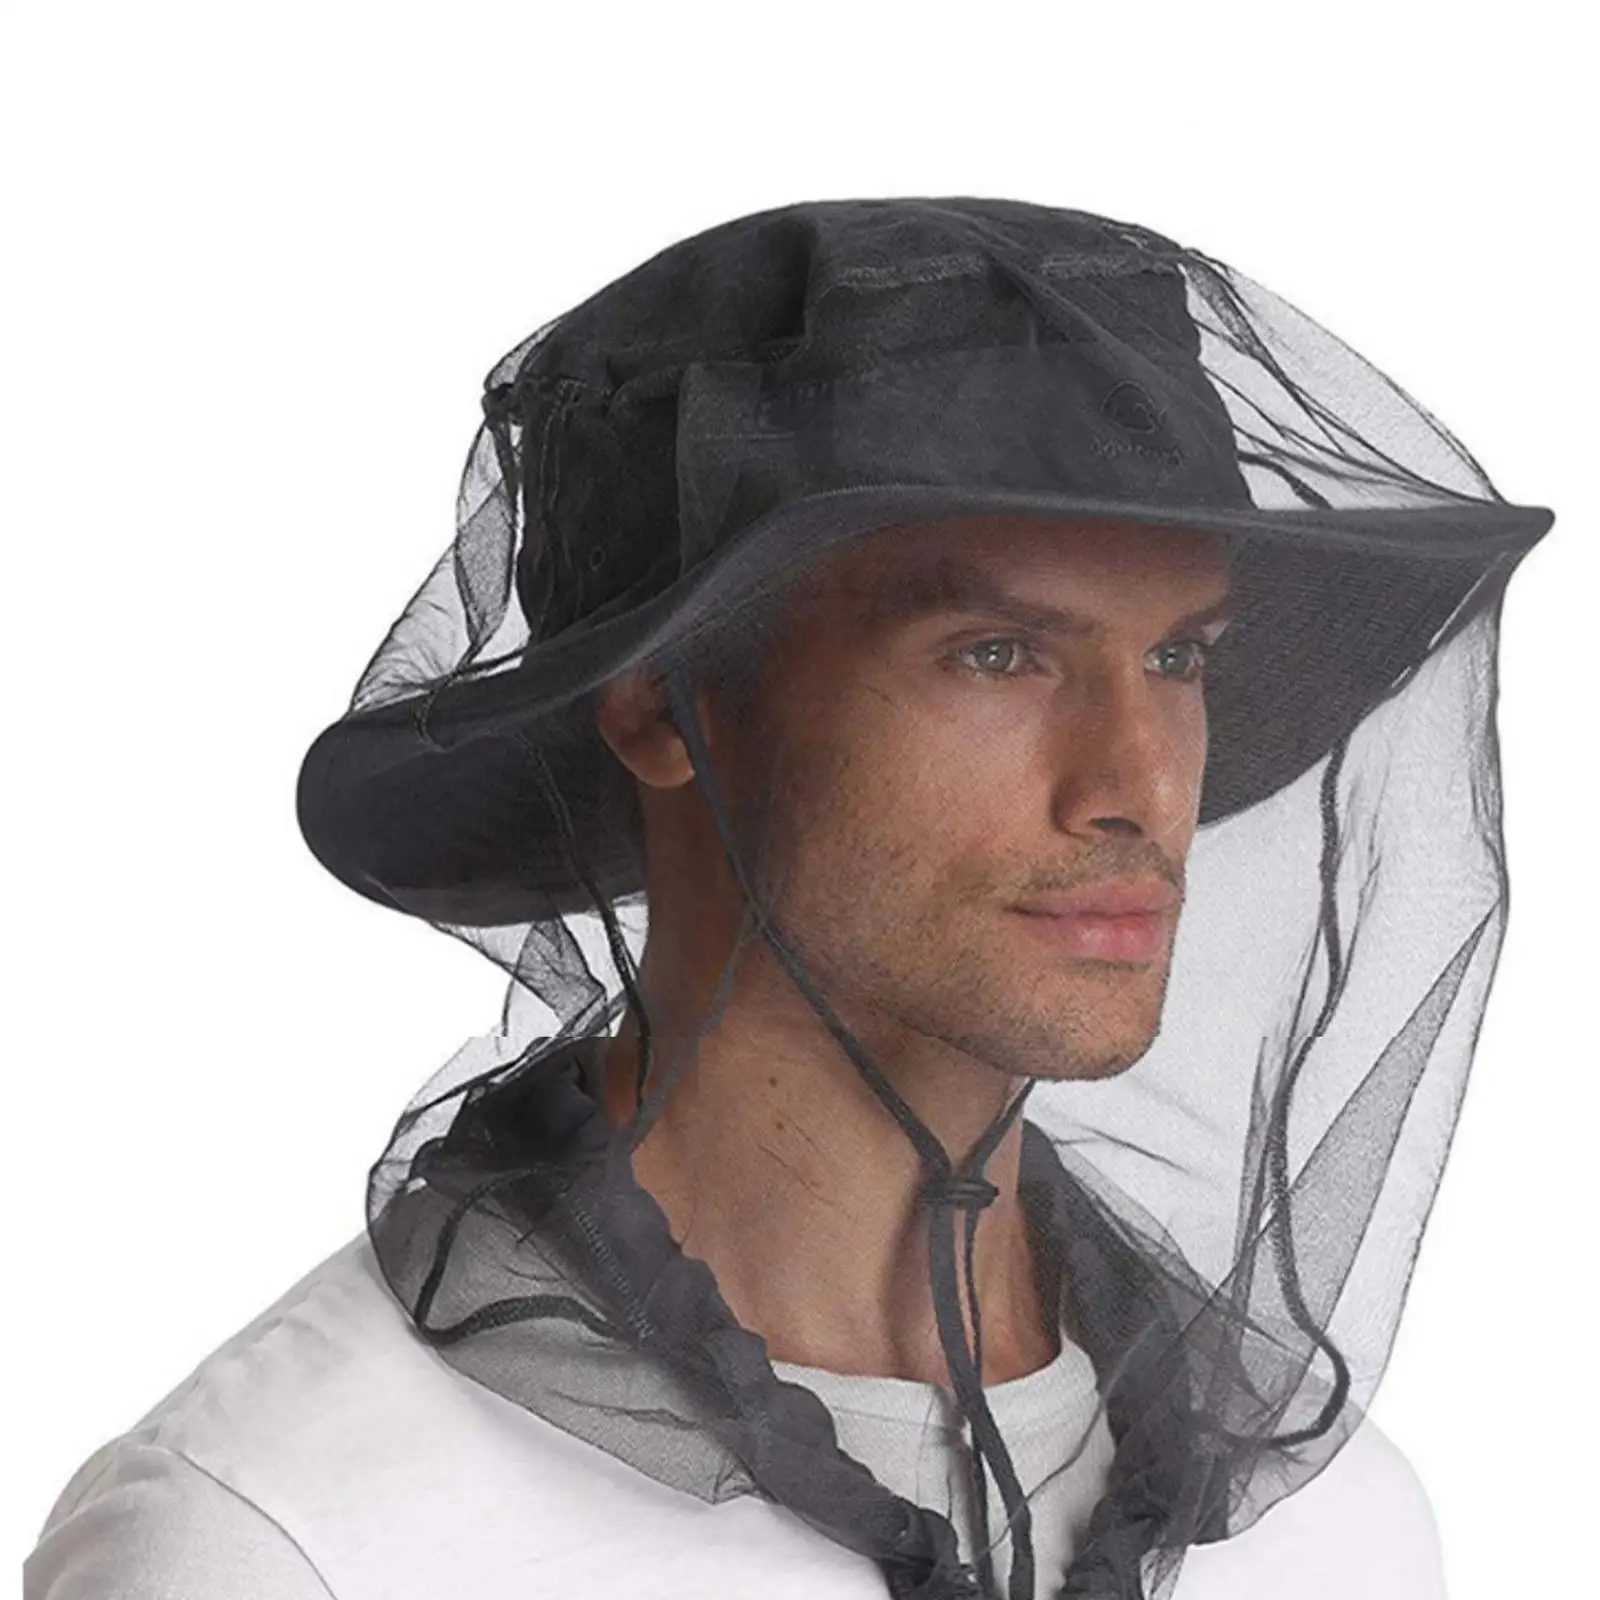 

Outdoor Fishing Bee Bite Hat Mesh Cover Mosquito Insect Mesh Protector Travel Fishing Bug Net Face 1pc Head Camping Hat G2X7